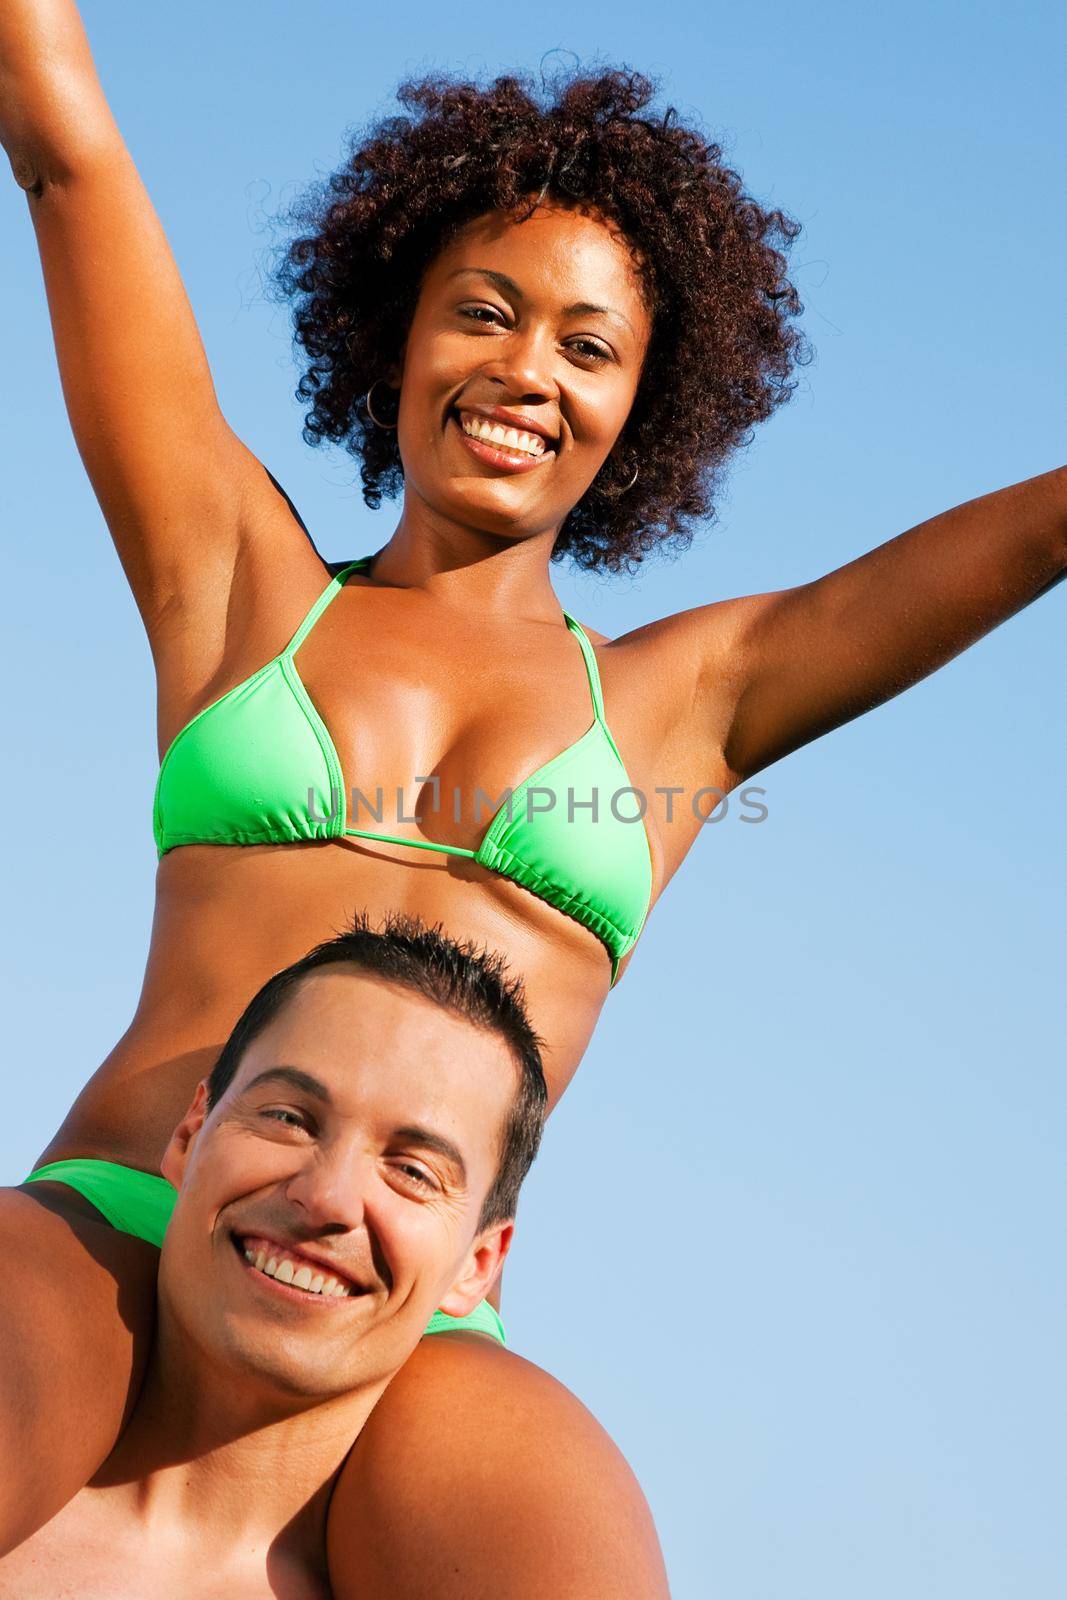 Couple in love - Woman of color in bikini sitting on her man’s shoulders under blue sky - summer and fun